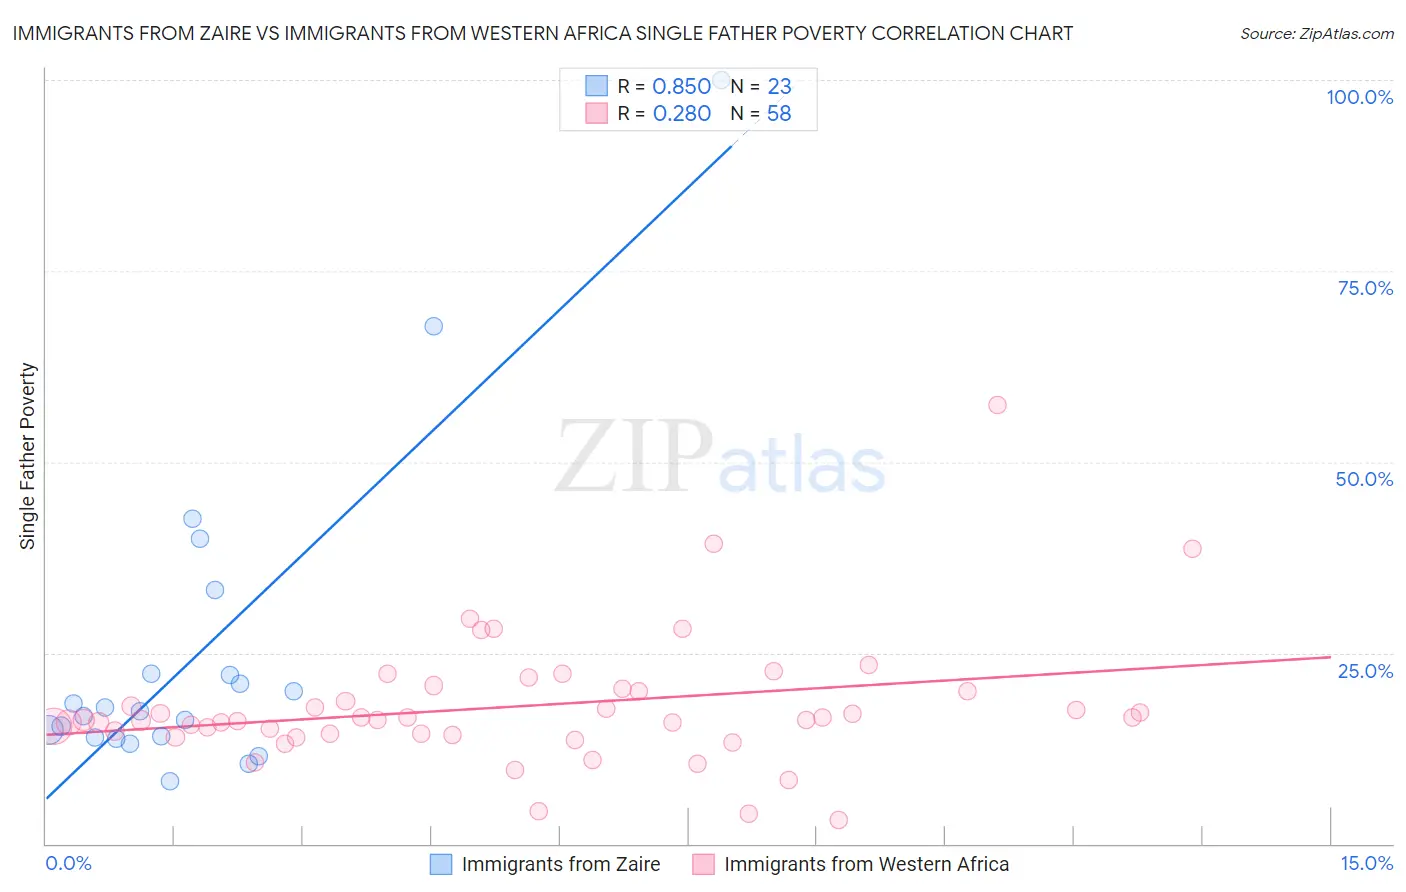 Immigrants from Zaire vs Immigrants from Western Africa Single Father Poverty